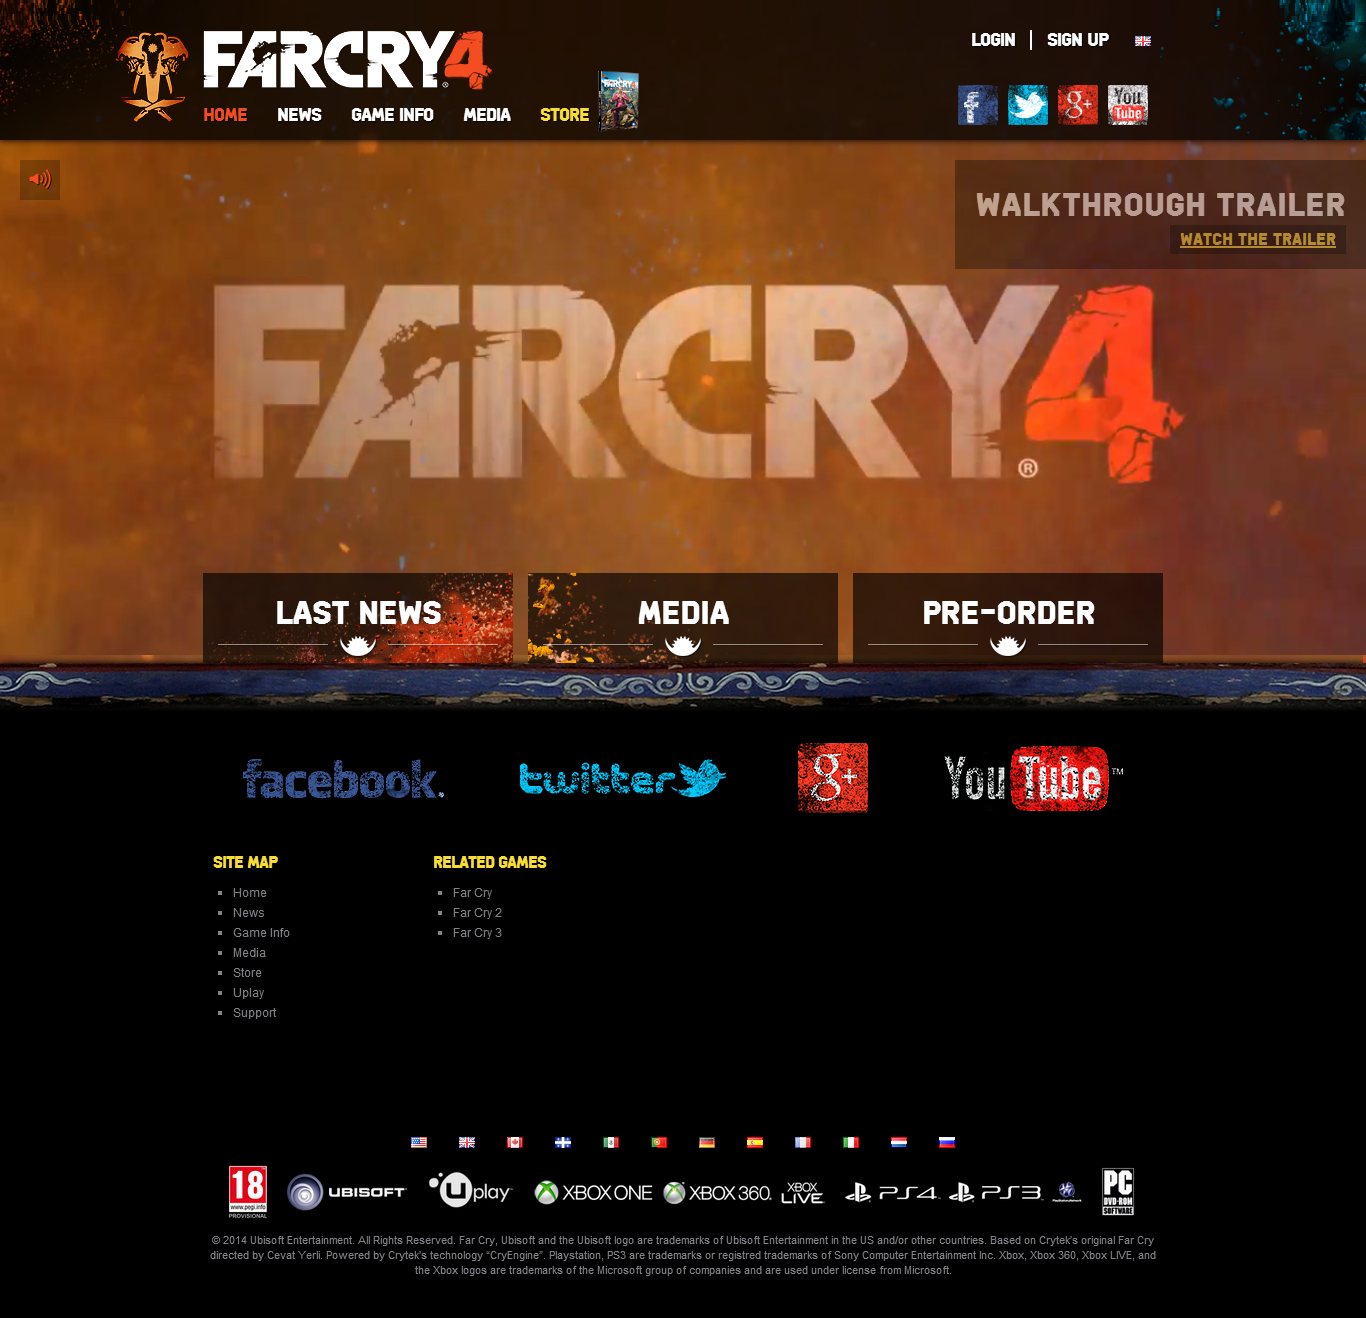 FarCry4 AndroDollar - Far Cry 4 Trailer and Gameplay Demo shows off amazing graphics and how crazy the game is going to be